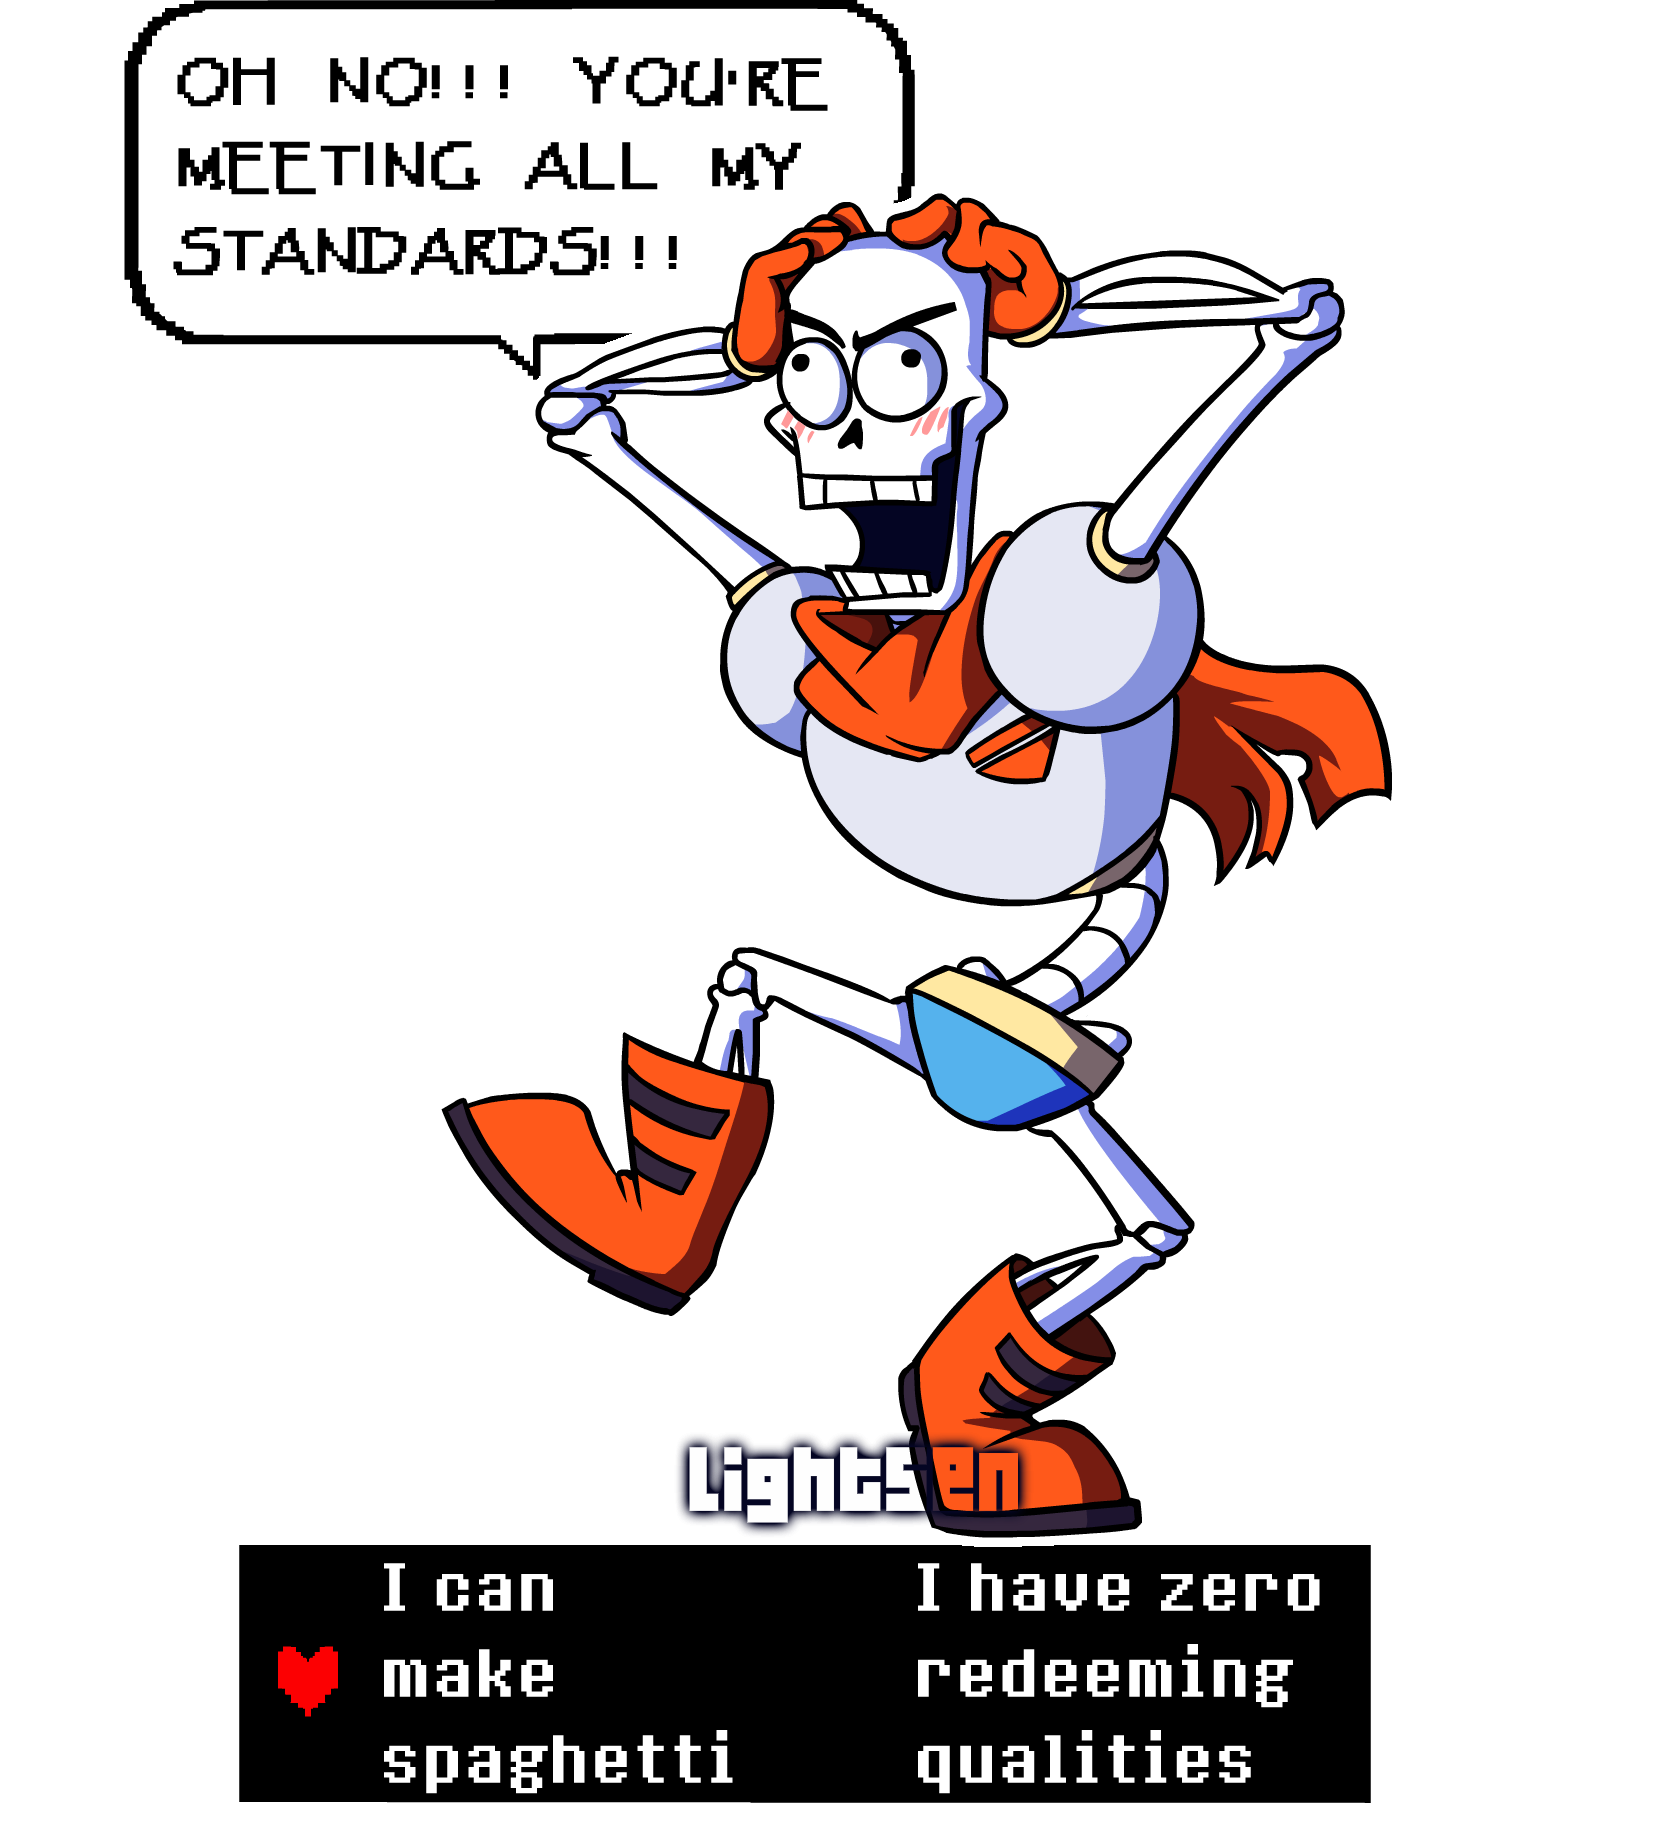 Papyrus is trying to play it cool